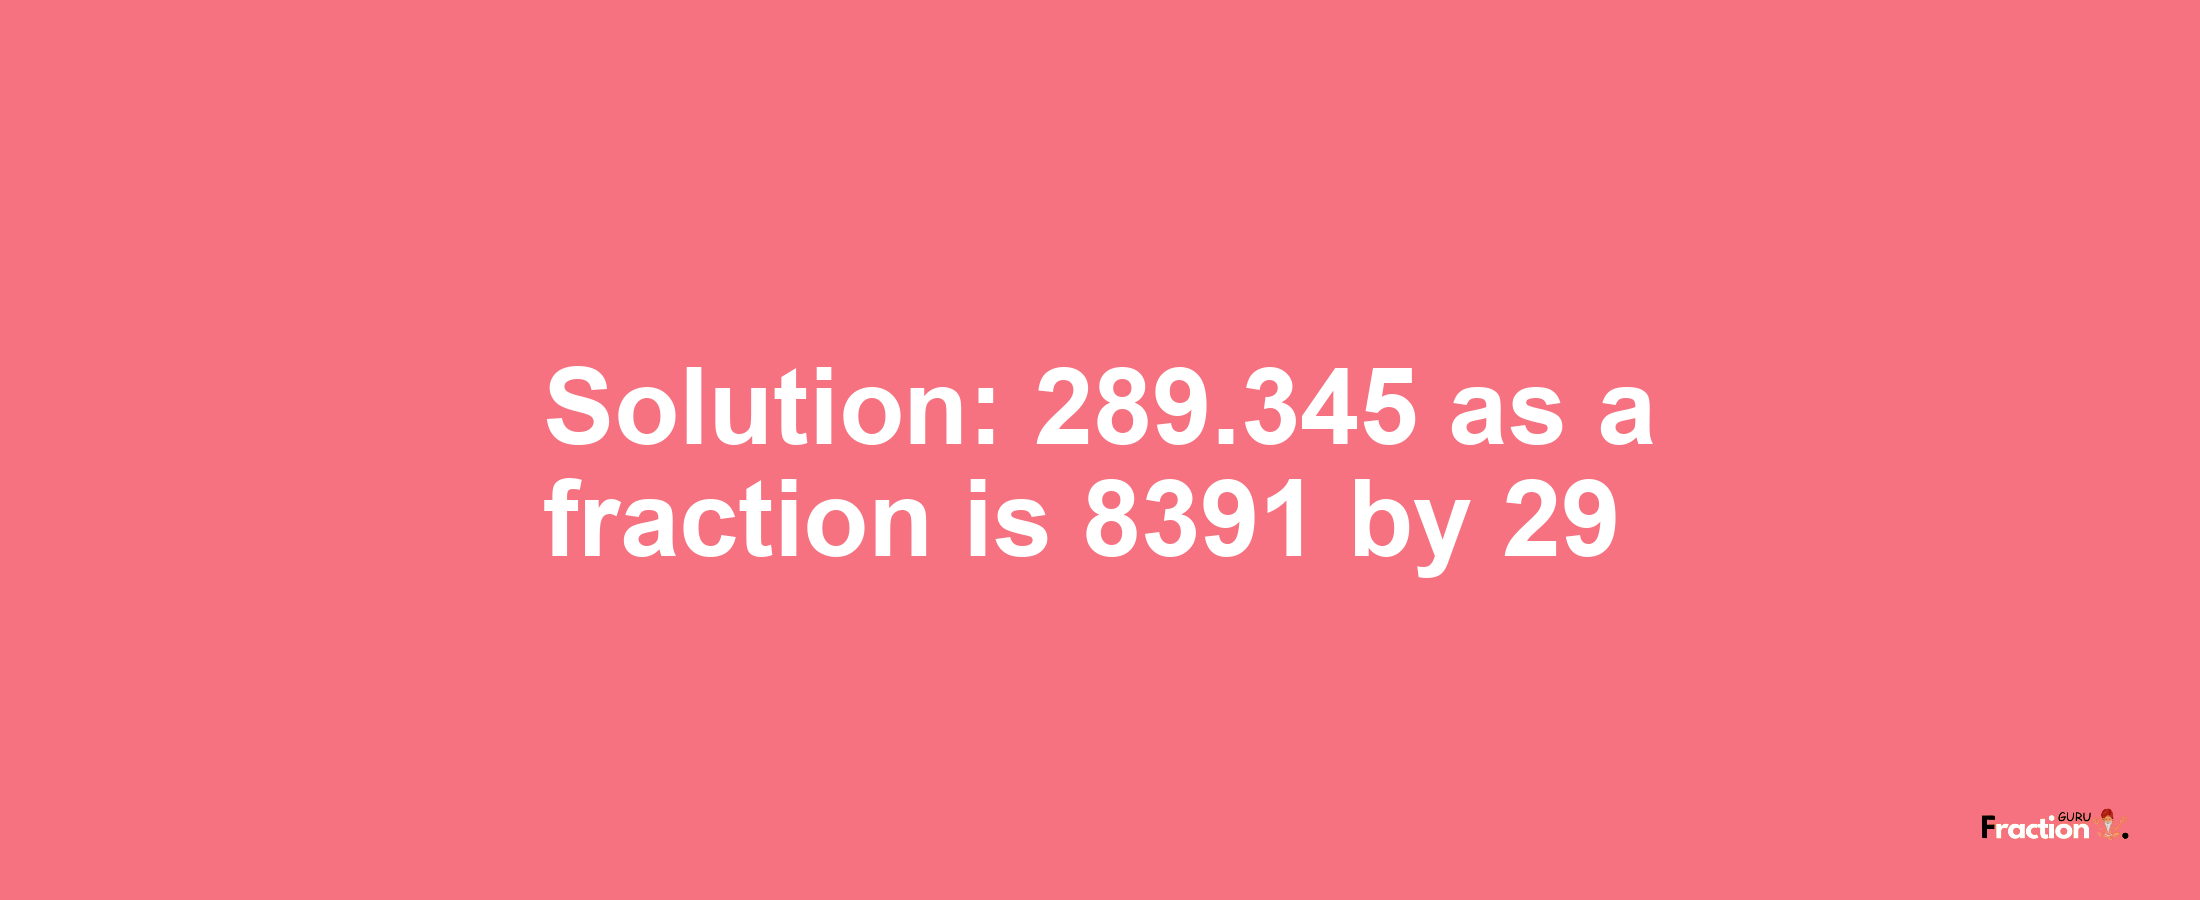 Solution:289.345 as a fraction is 8391/29